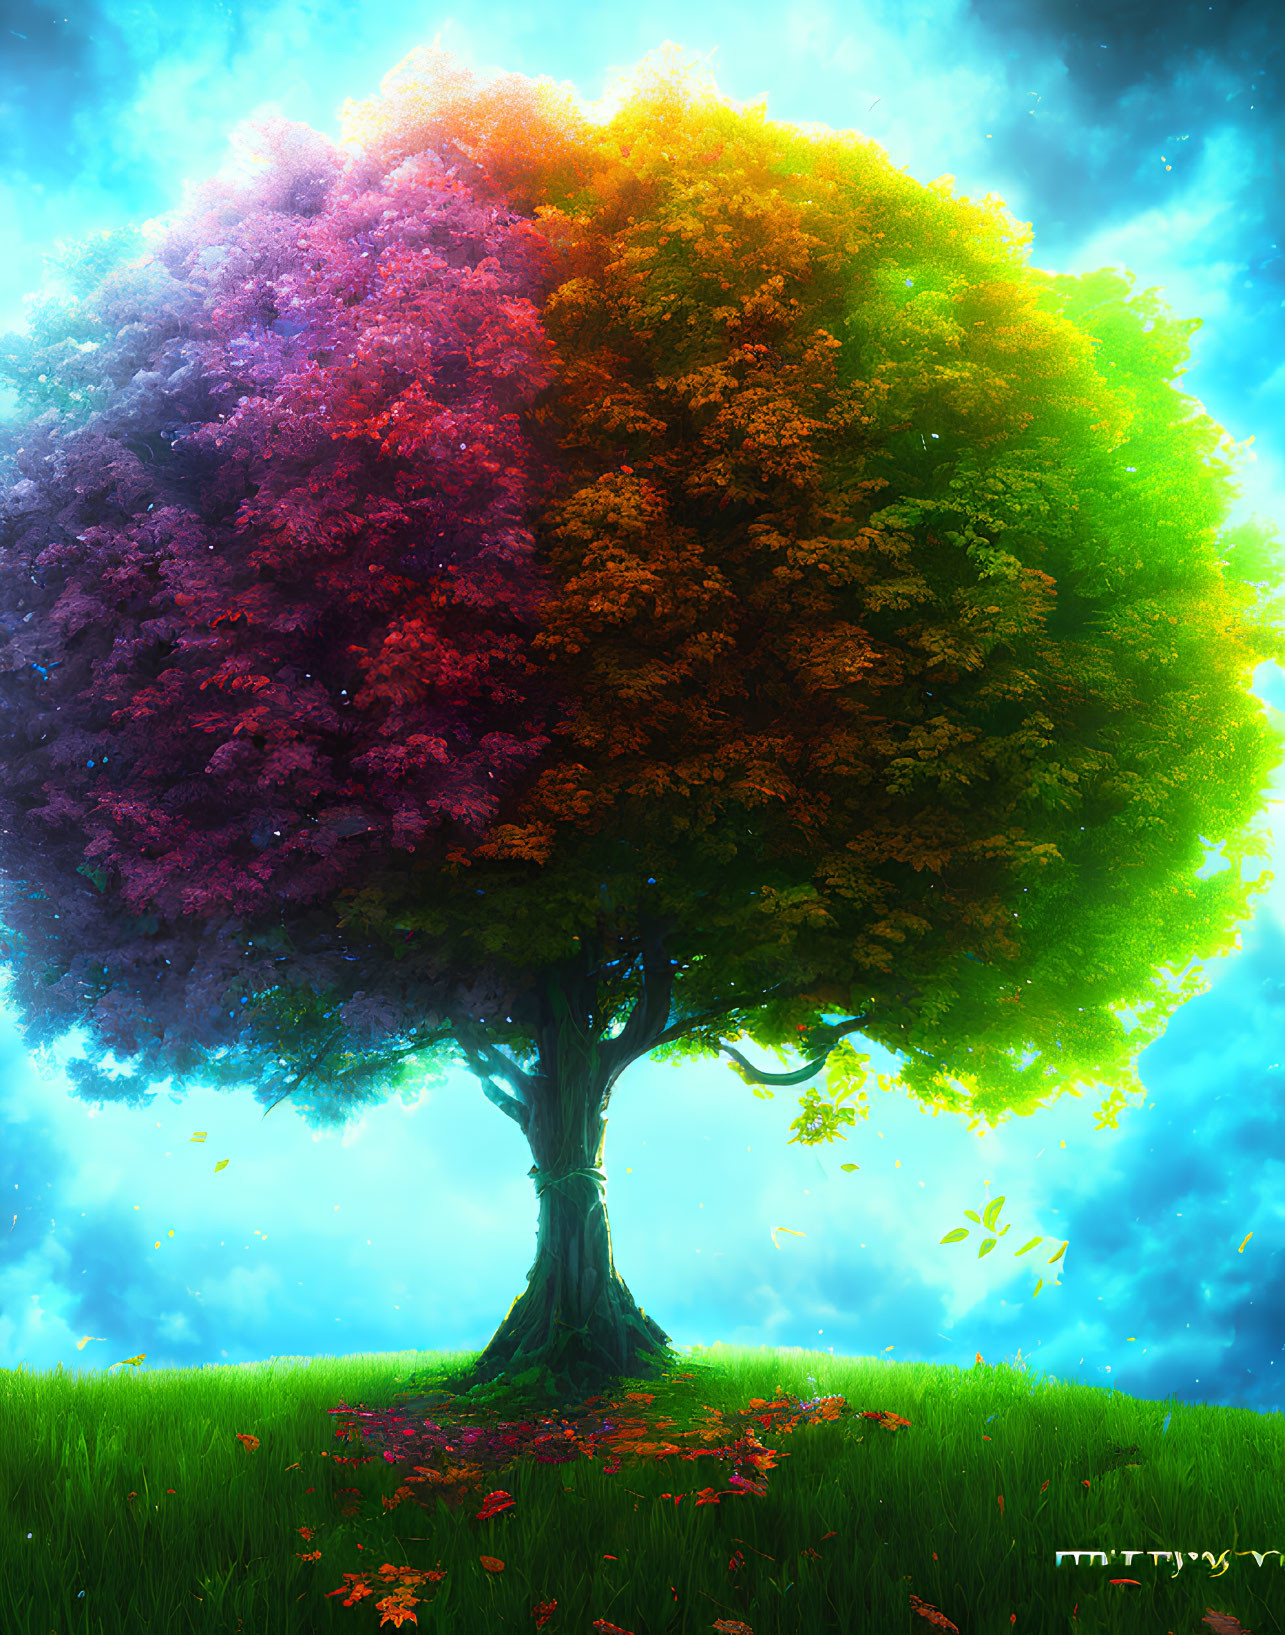 Colorful mystical tree with falling leaves under bright sky